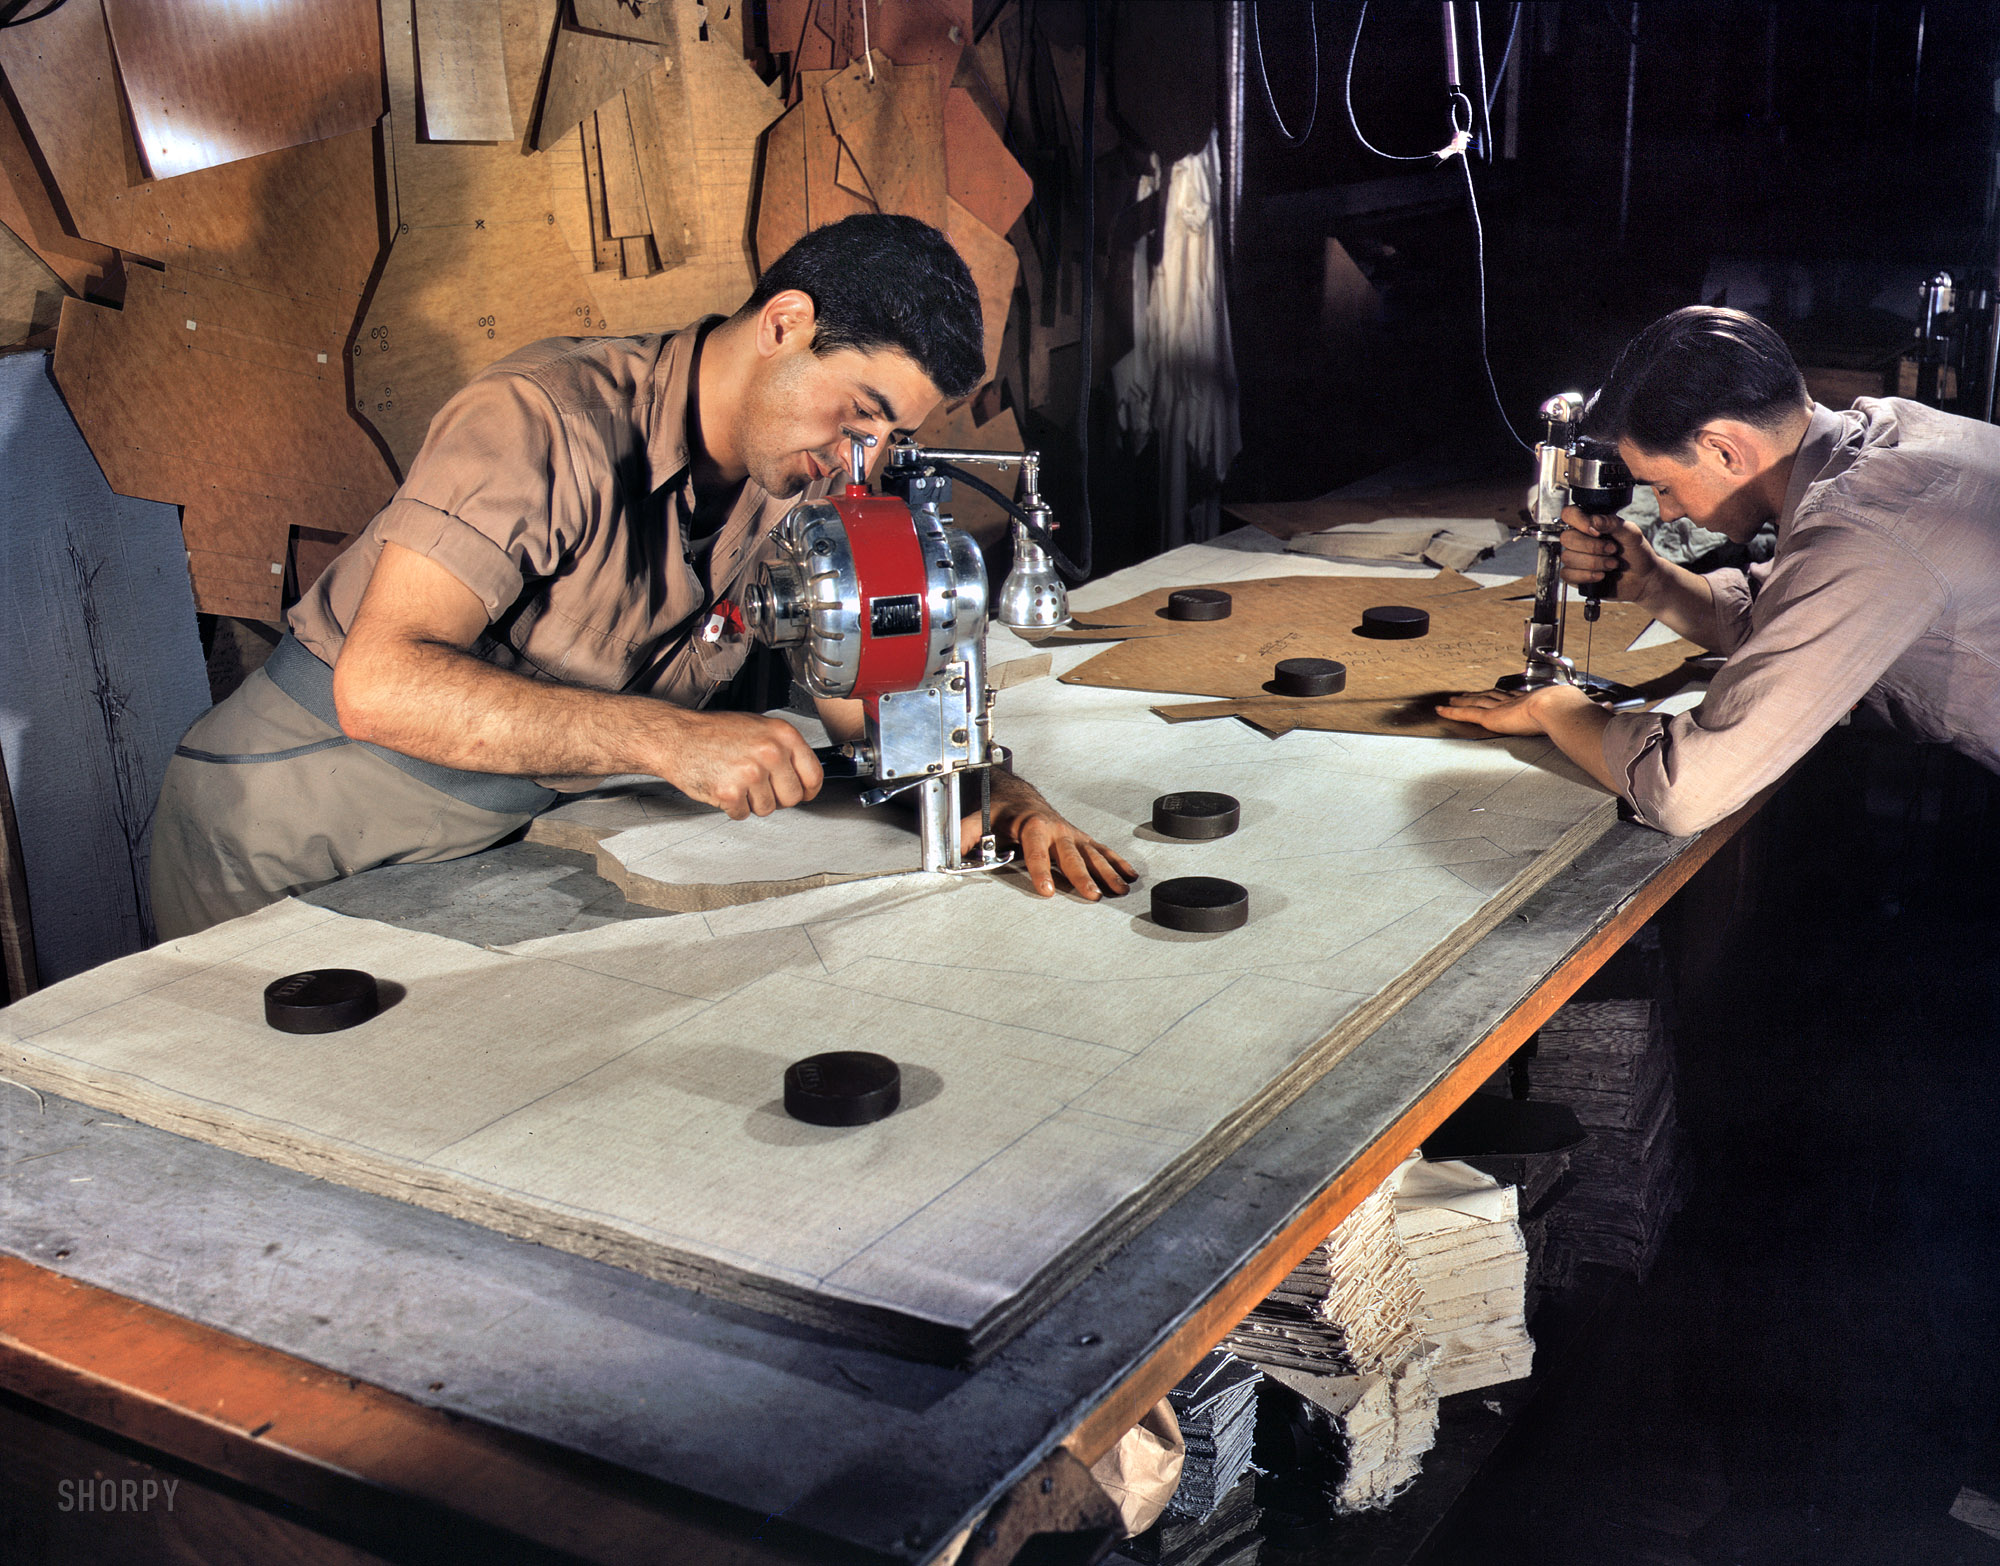 August 1942. Manchester, Connecticut. "The utmost precision is required of these operators who are cutting and drilling parachute packs in an Eastern factory. Their work is under constant close supervision. Pioneer Parachute Company." 4x5 Kodachrome transparency by William M. Rittase, OWI. View full size.